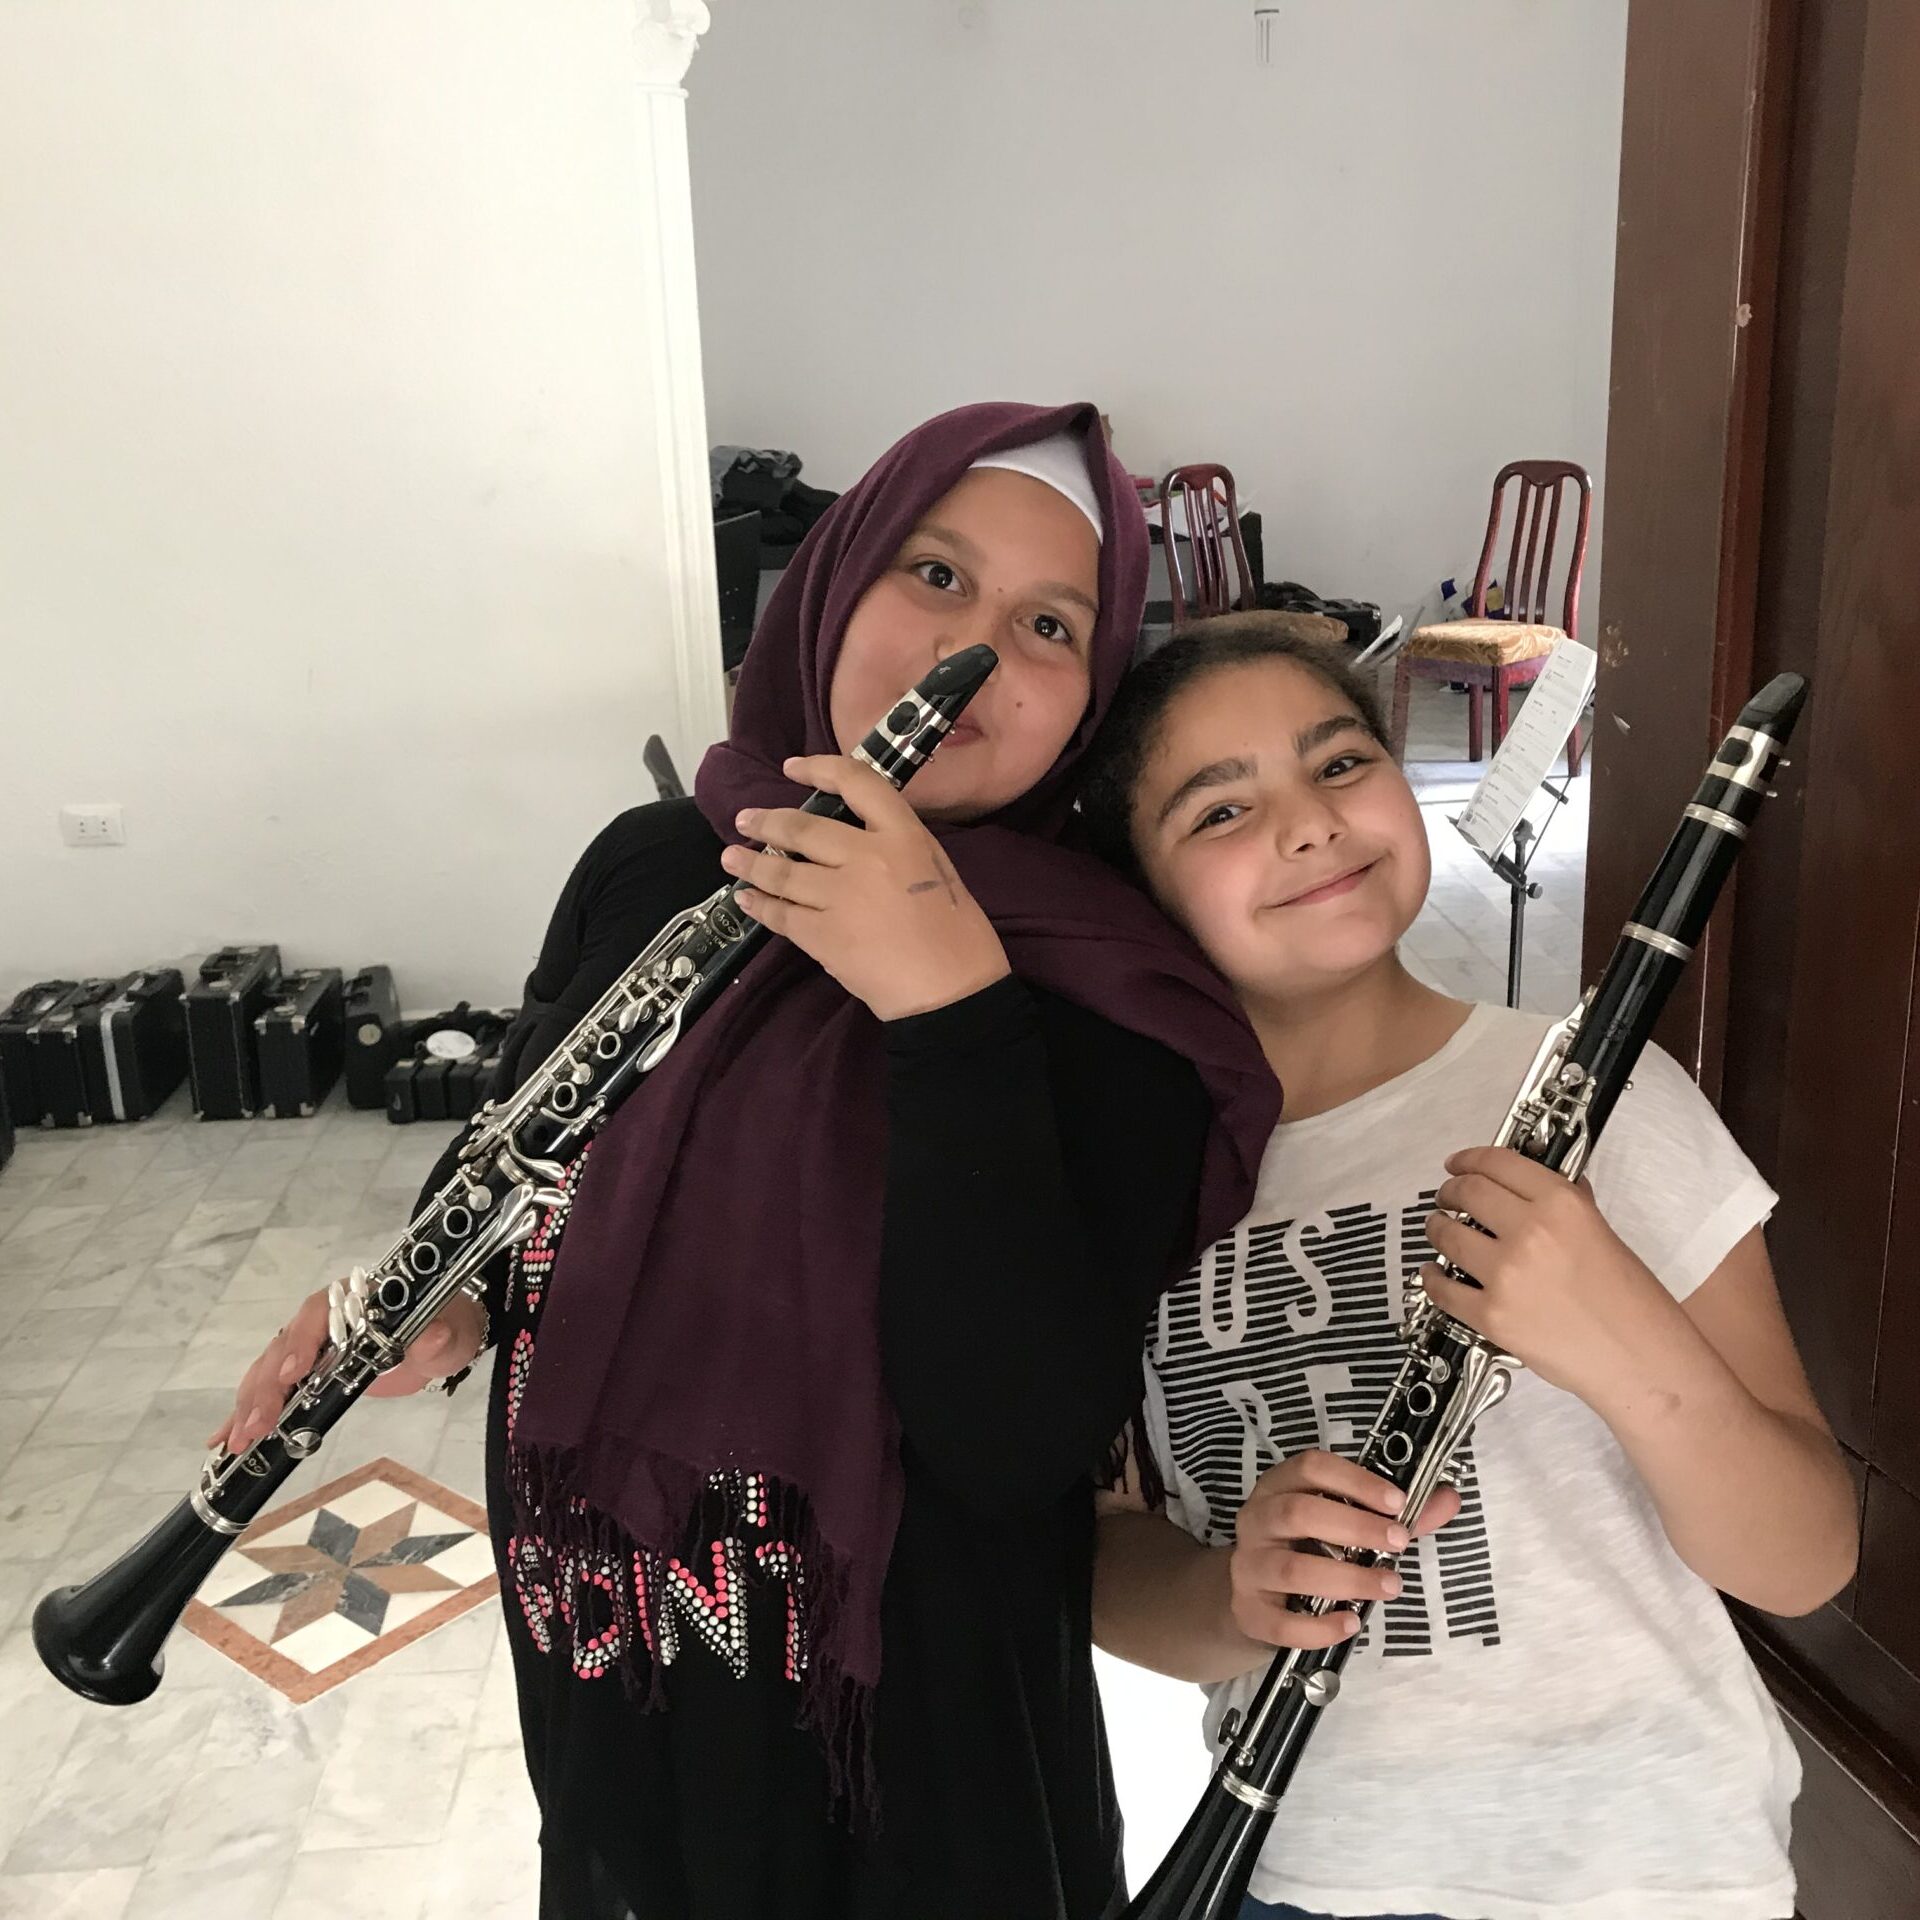 Two young Syrian refugee girls in Lebanon holding clarinets, smiling at the camera